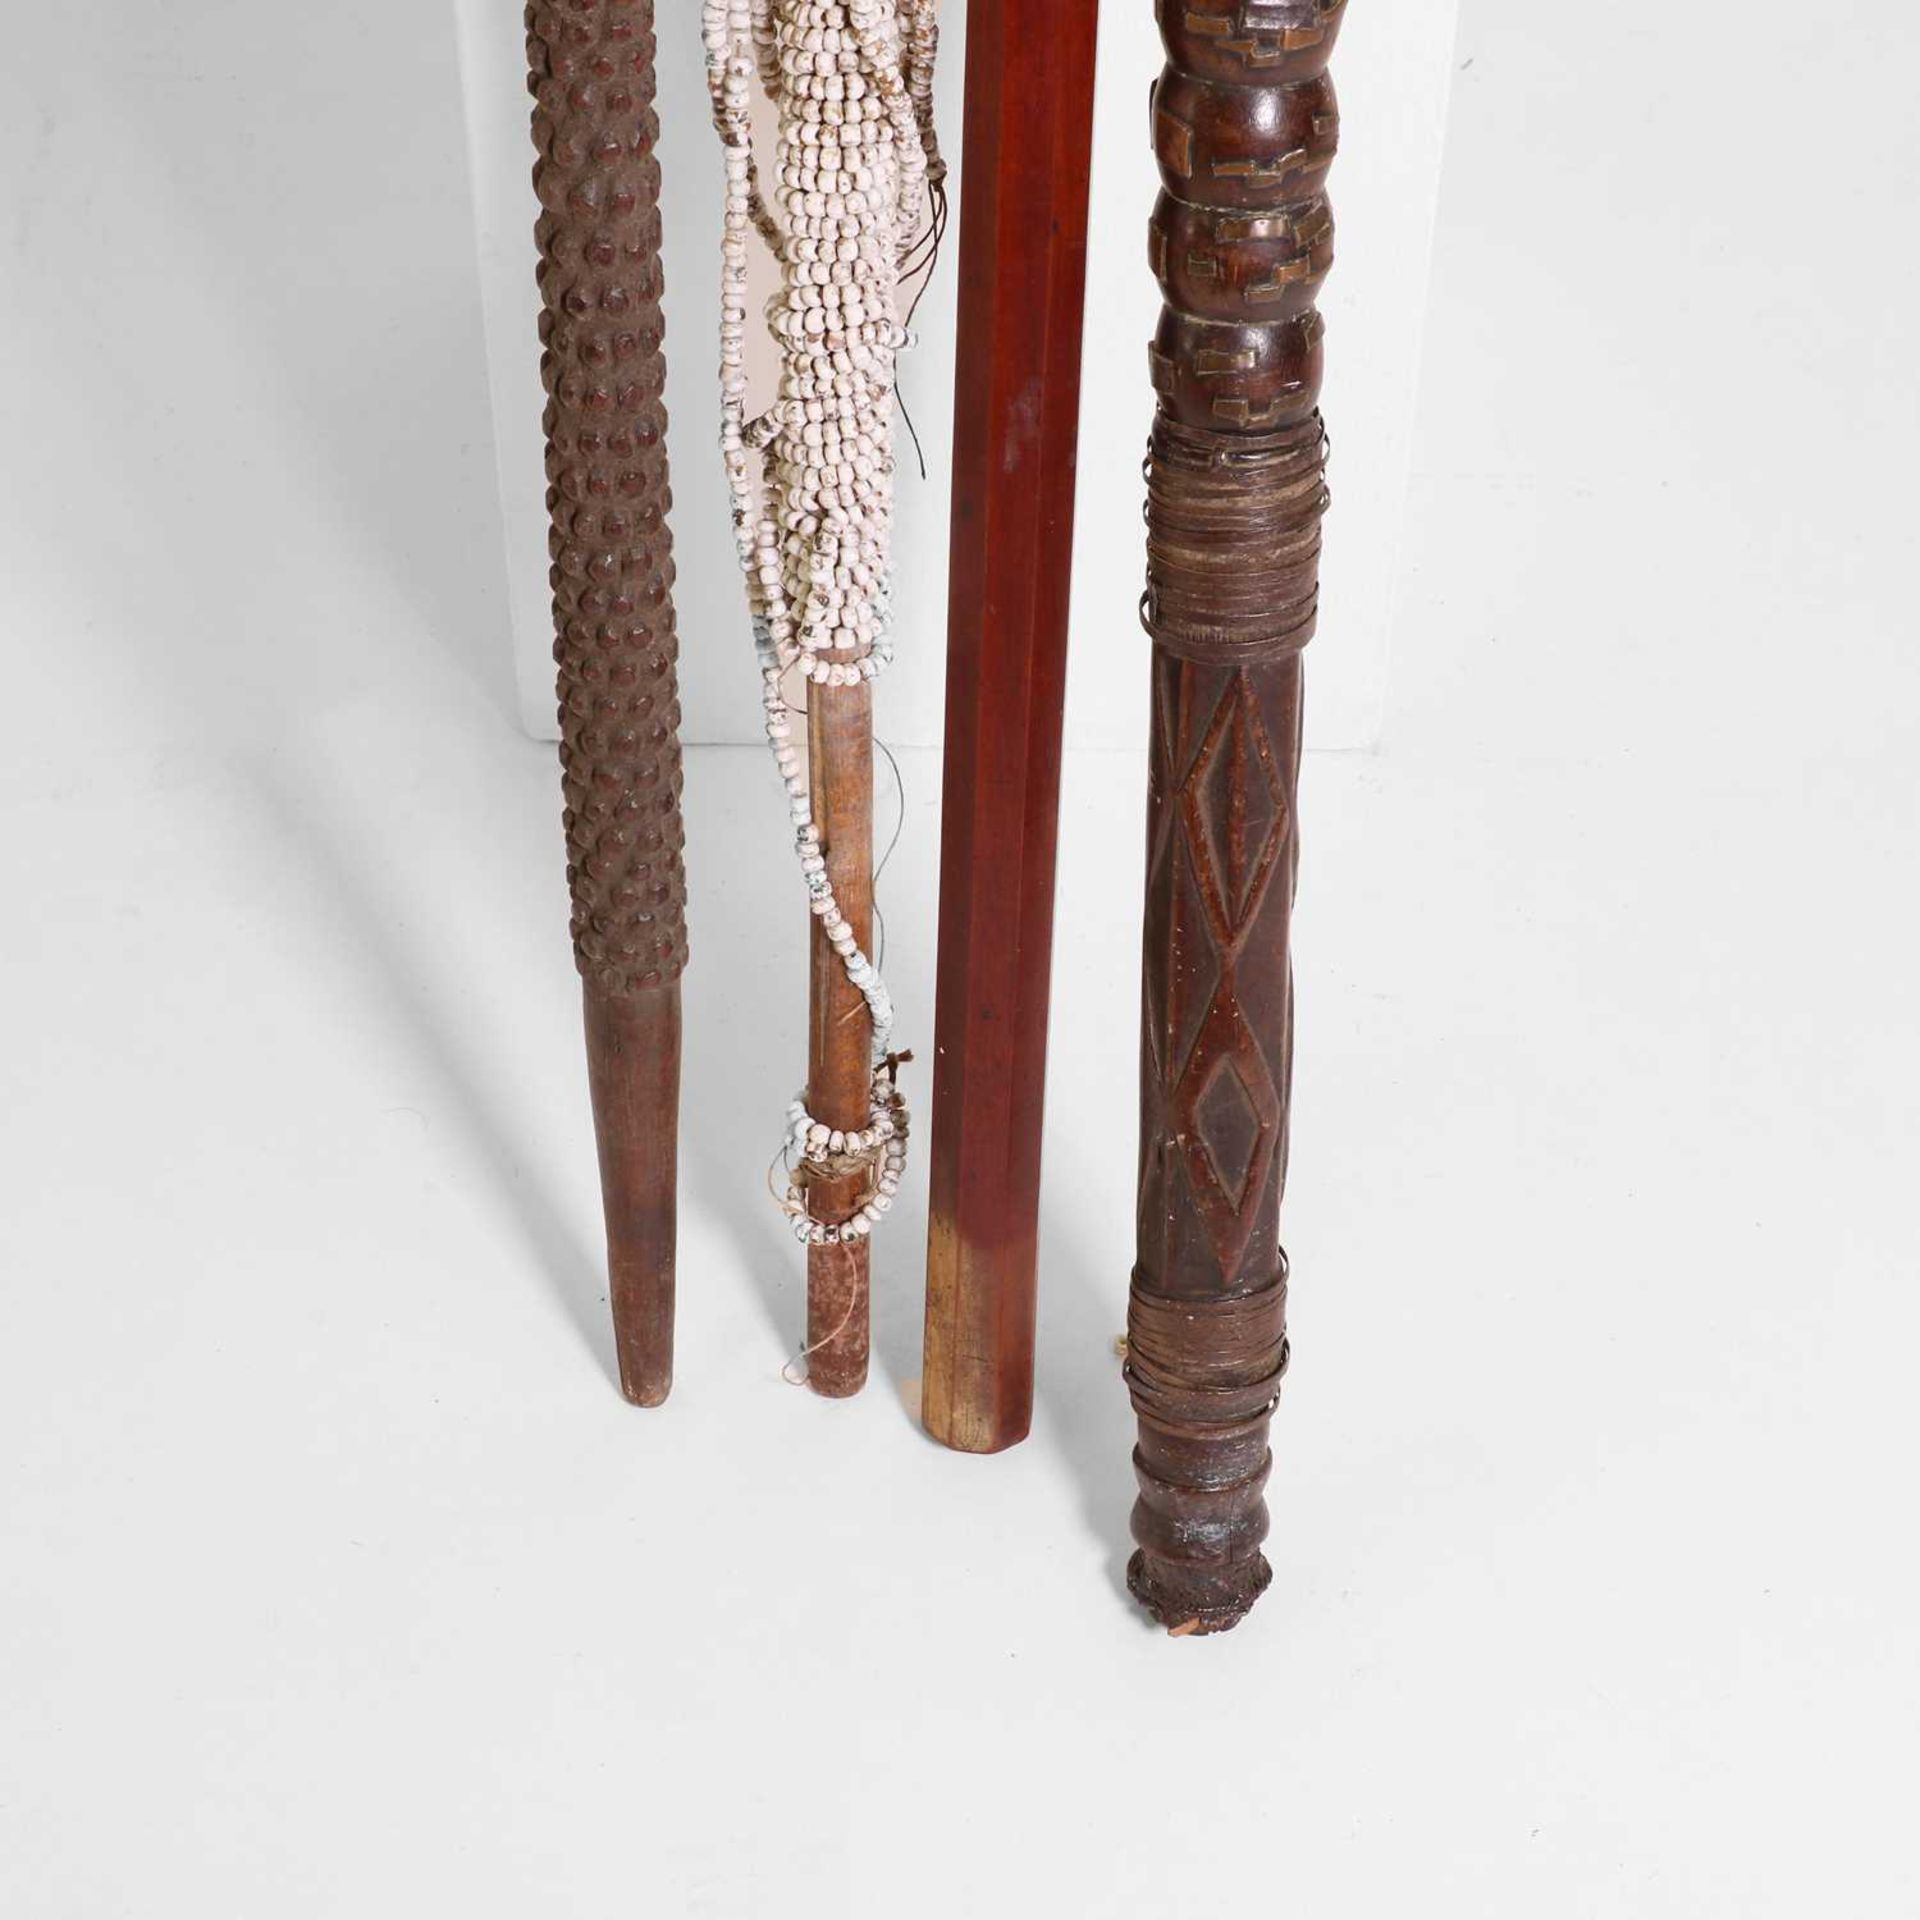 A collection of pipes, - Image 6 of 7